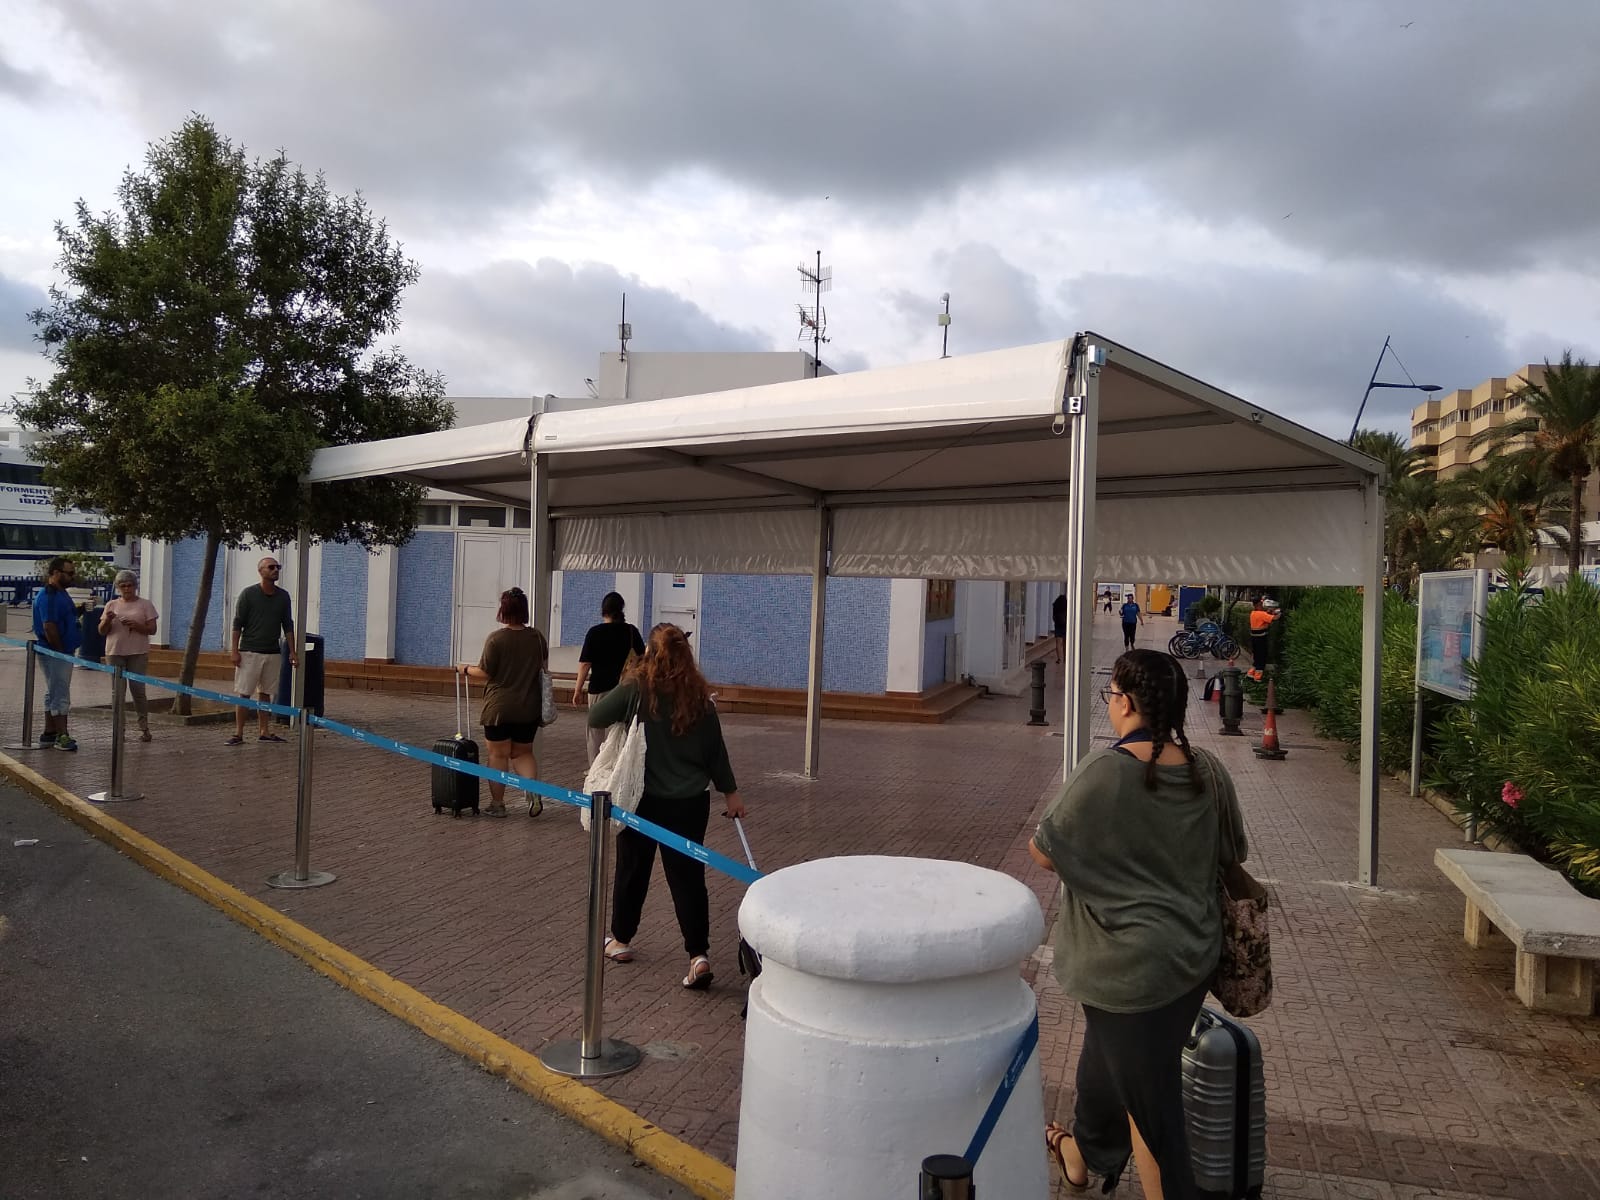 THE PORT AUTHORITY OF THE BALEARIC ISLANDS INSTALLS PORTABLE AWNINGS AT THE PORTS OF IBIZA AND LA SAVINA